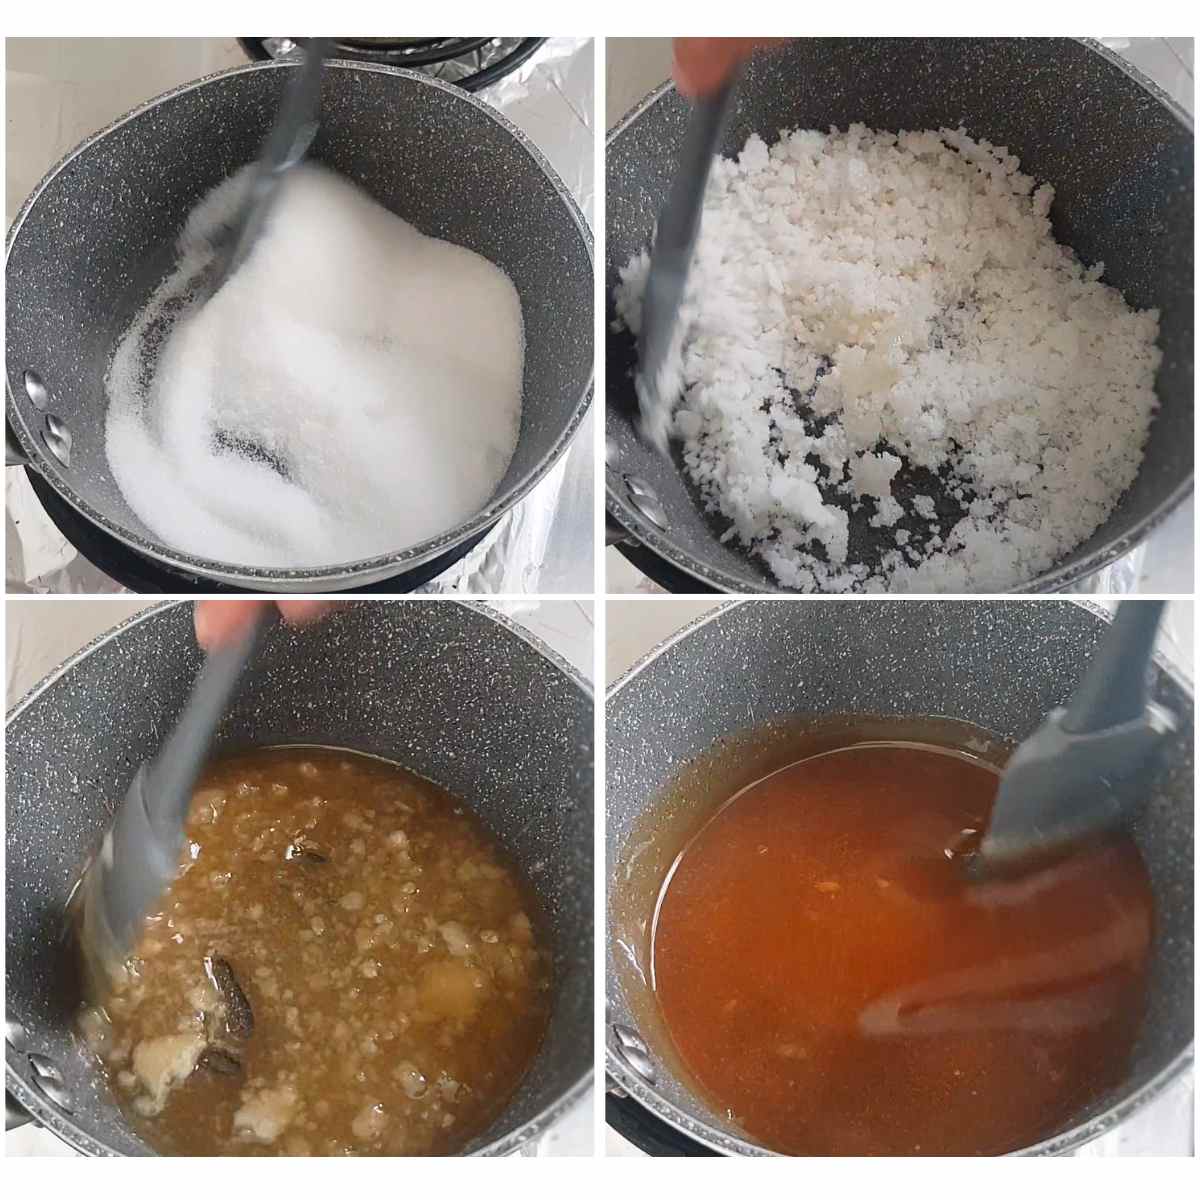 Image collage of melting the sugar.